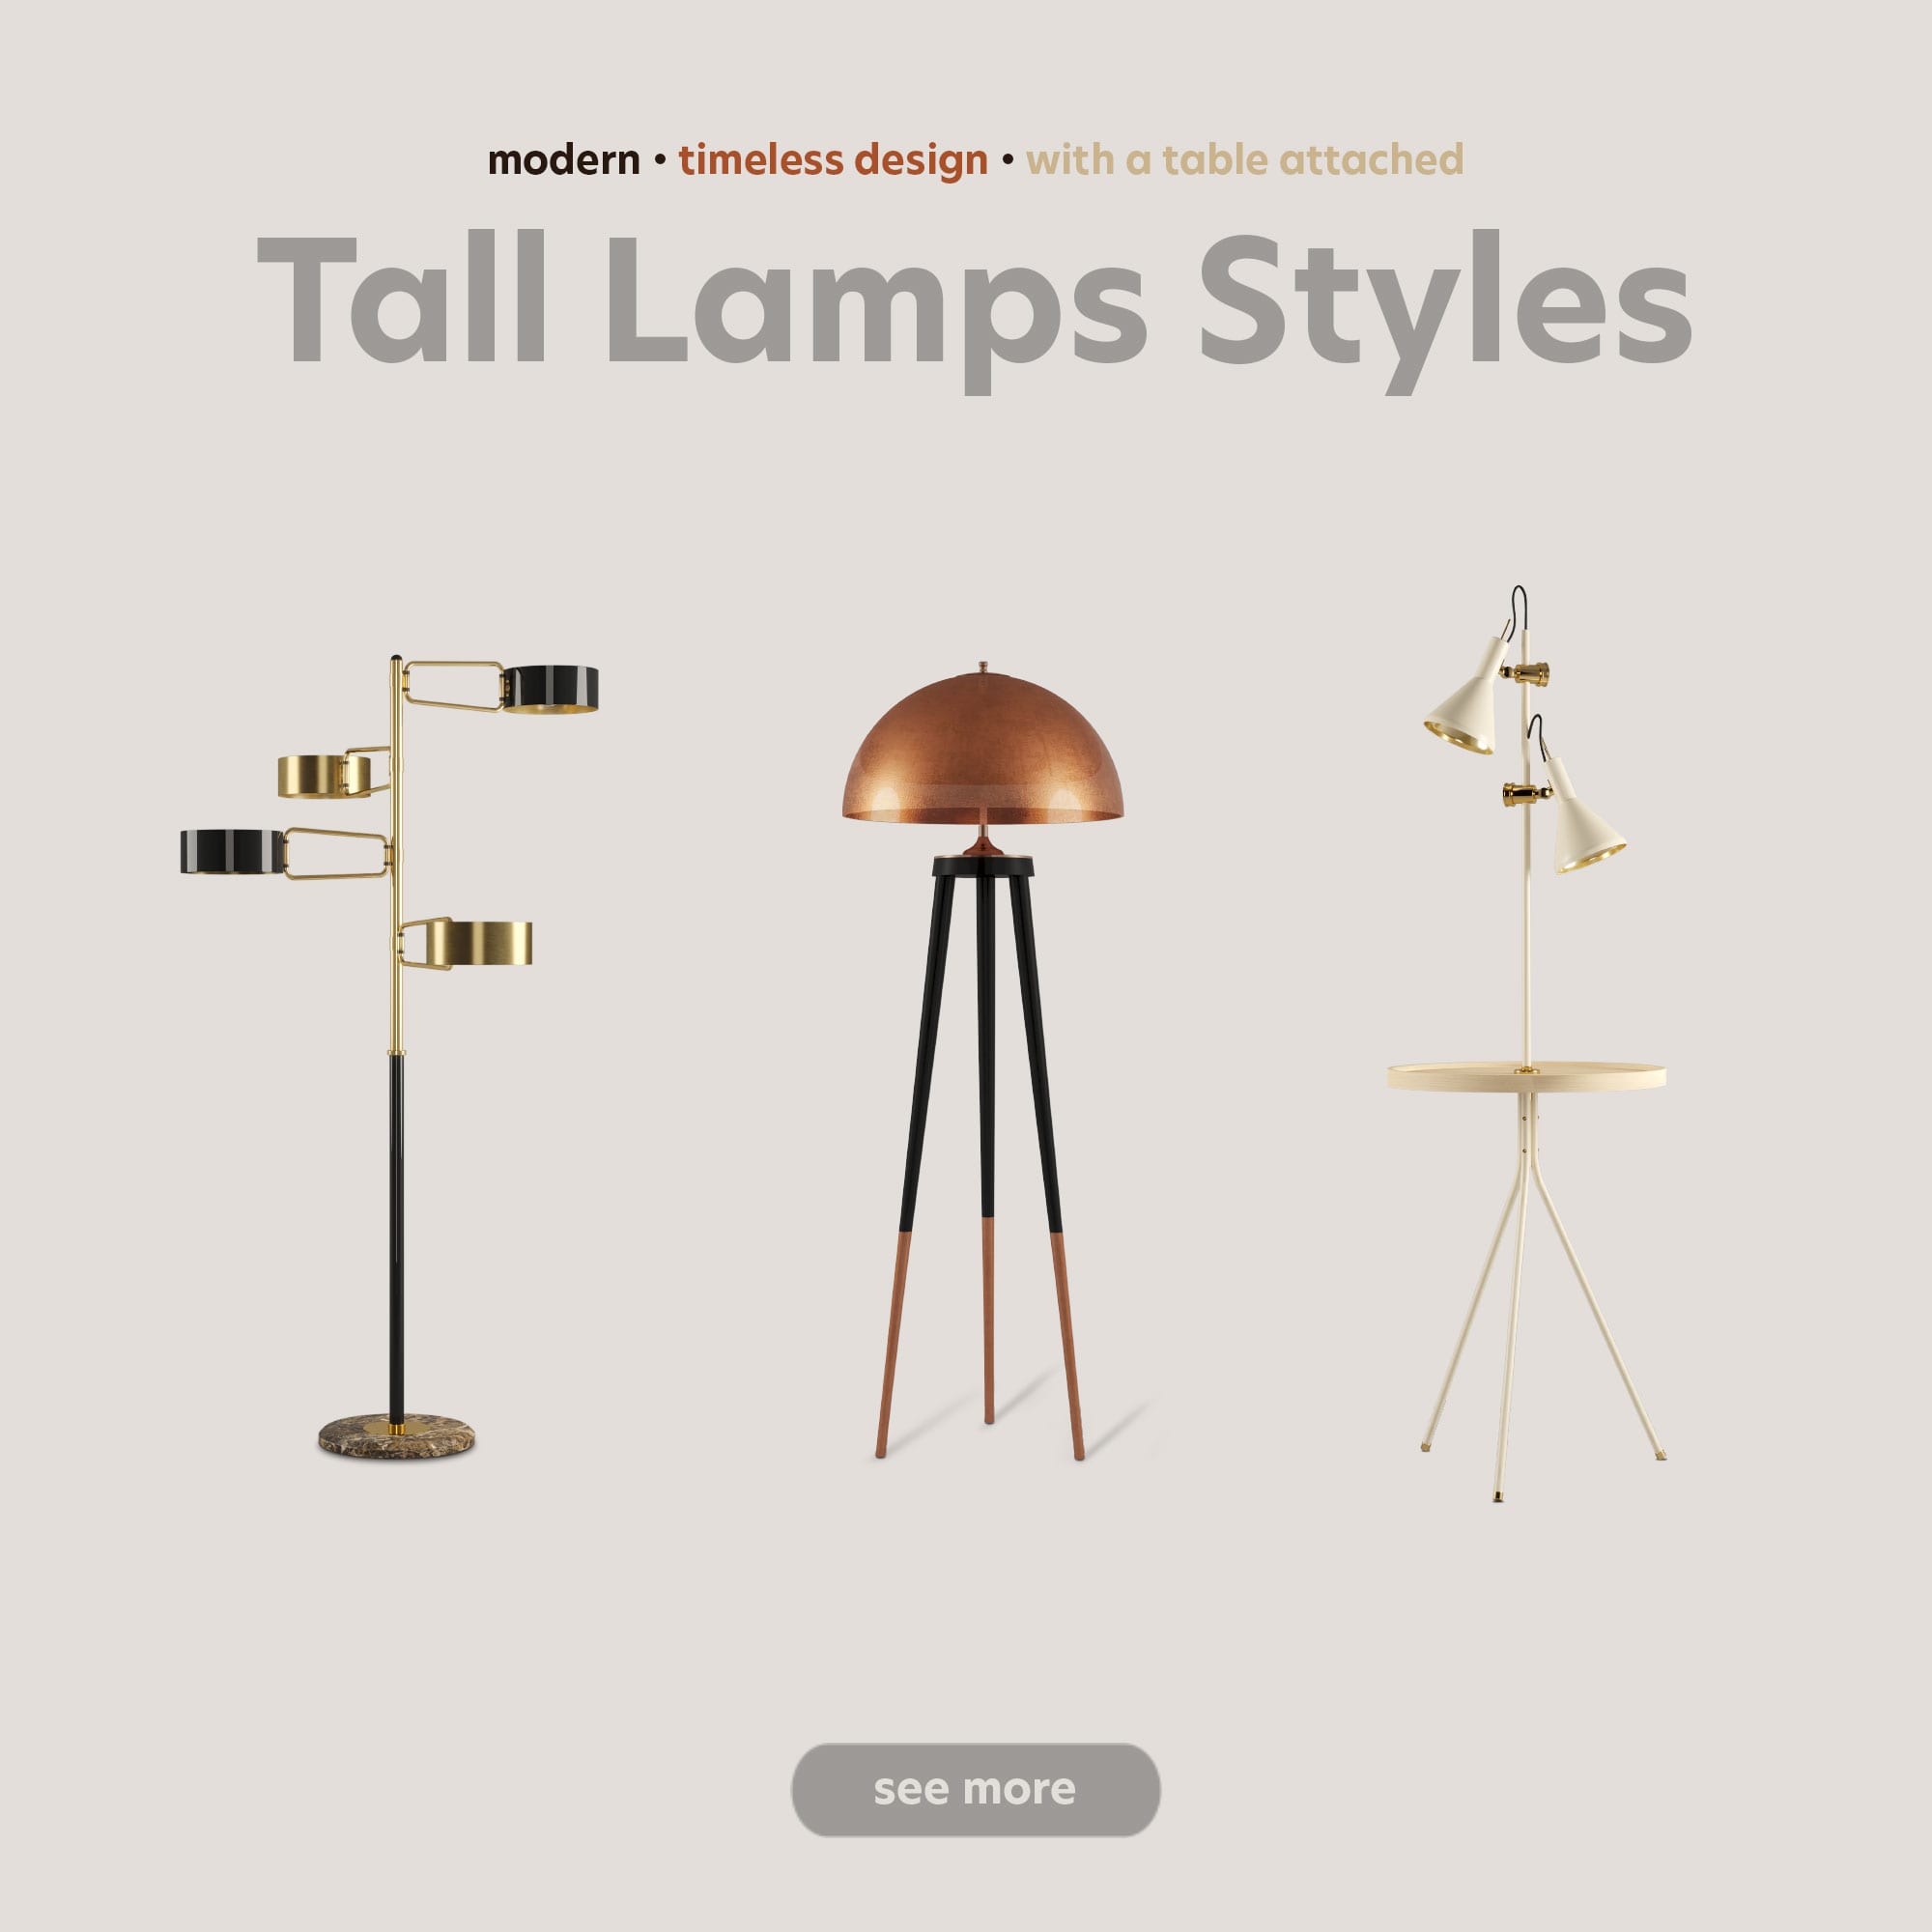 Tall lamps